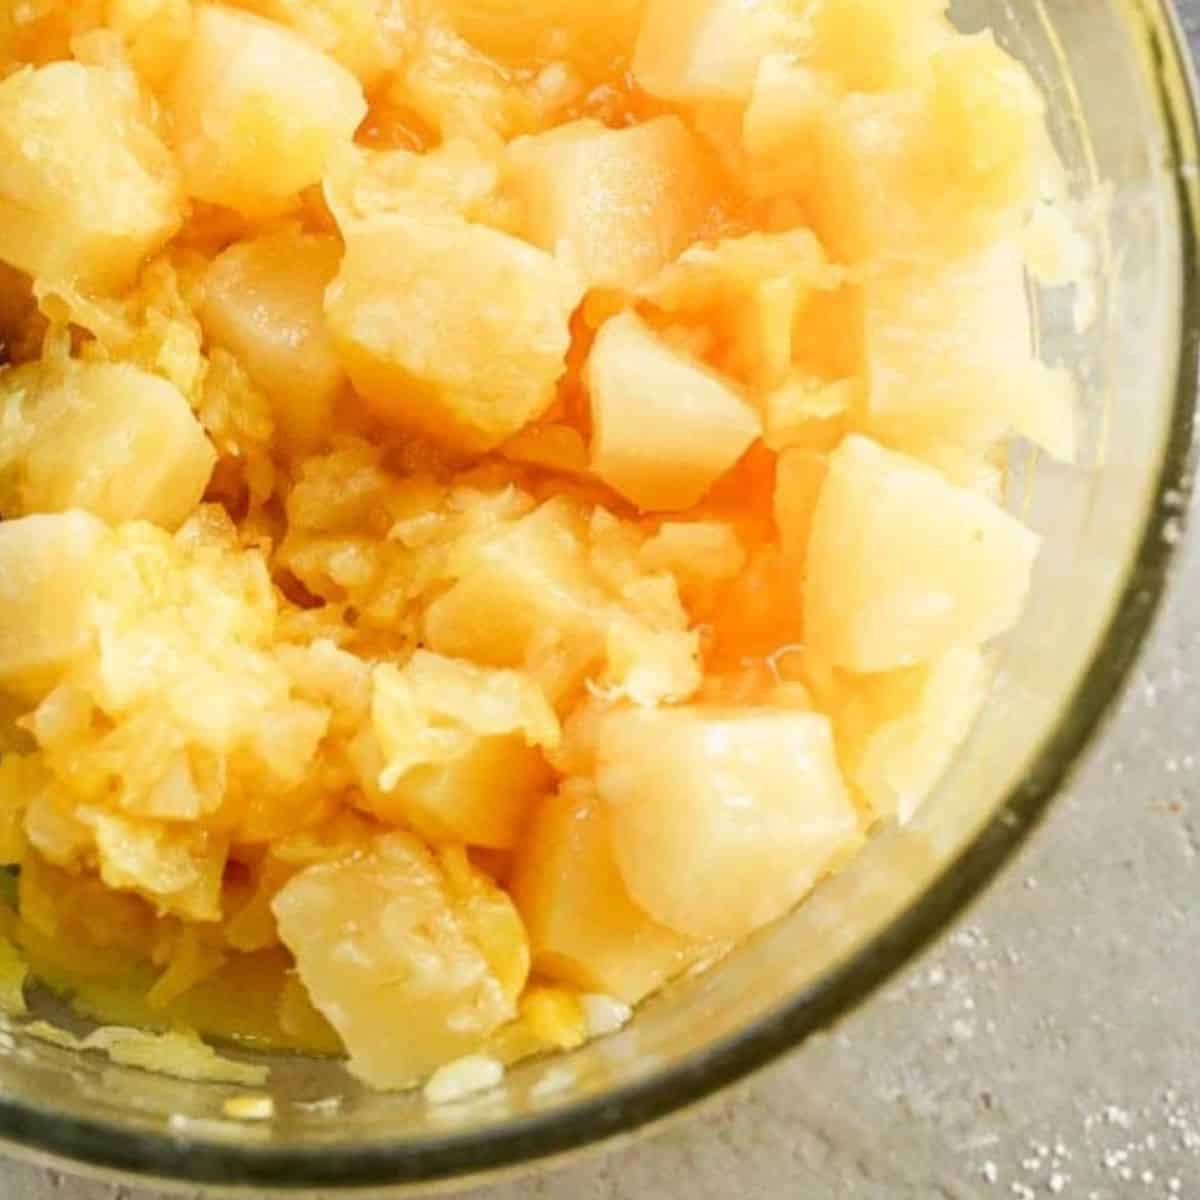 preparing filling for pineapple casserole in clear mixing bowl